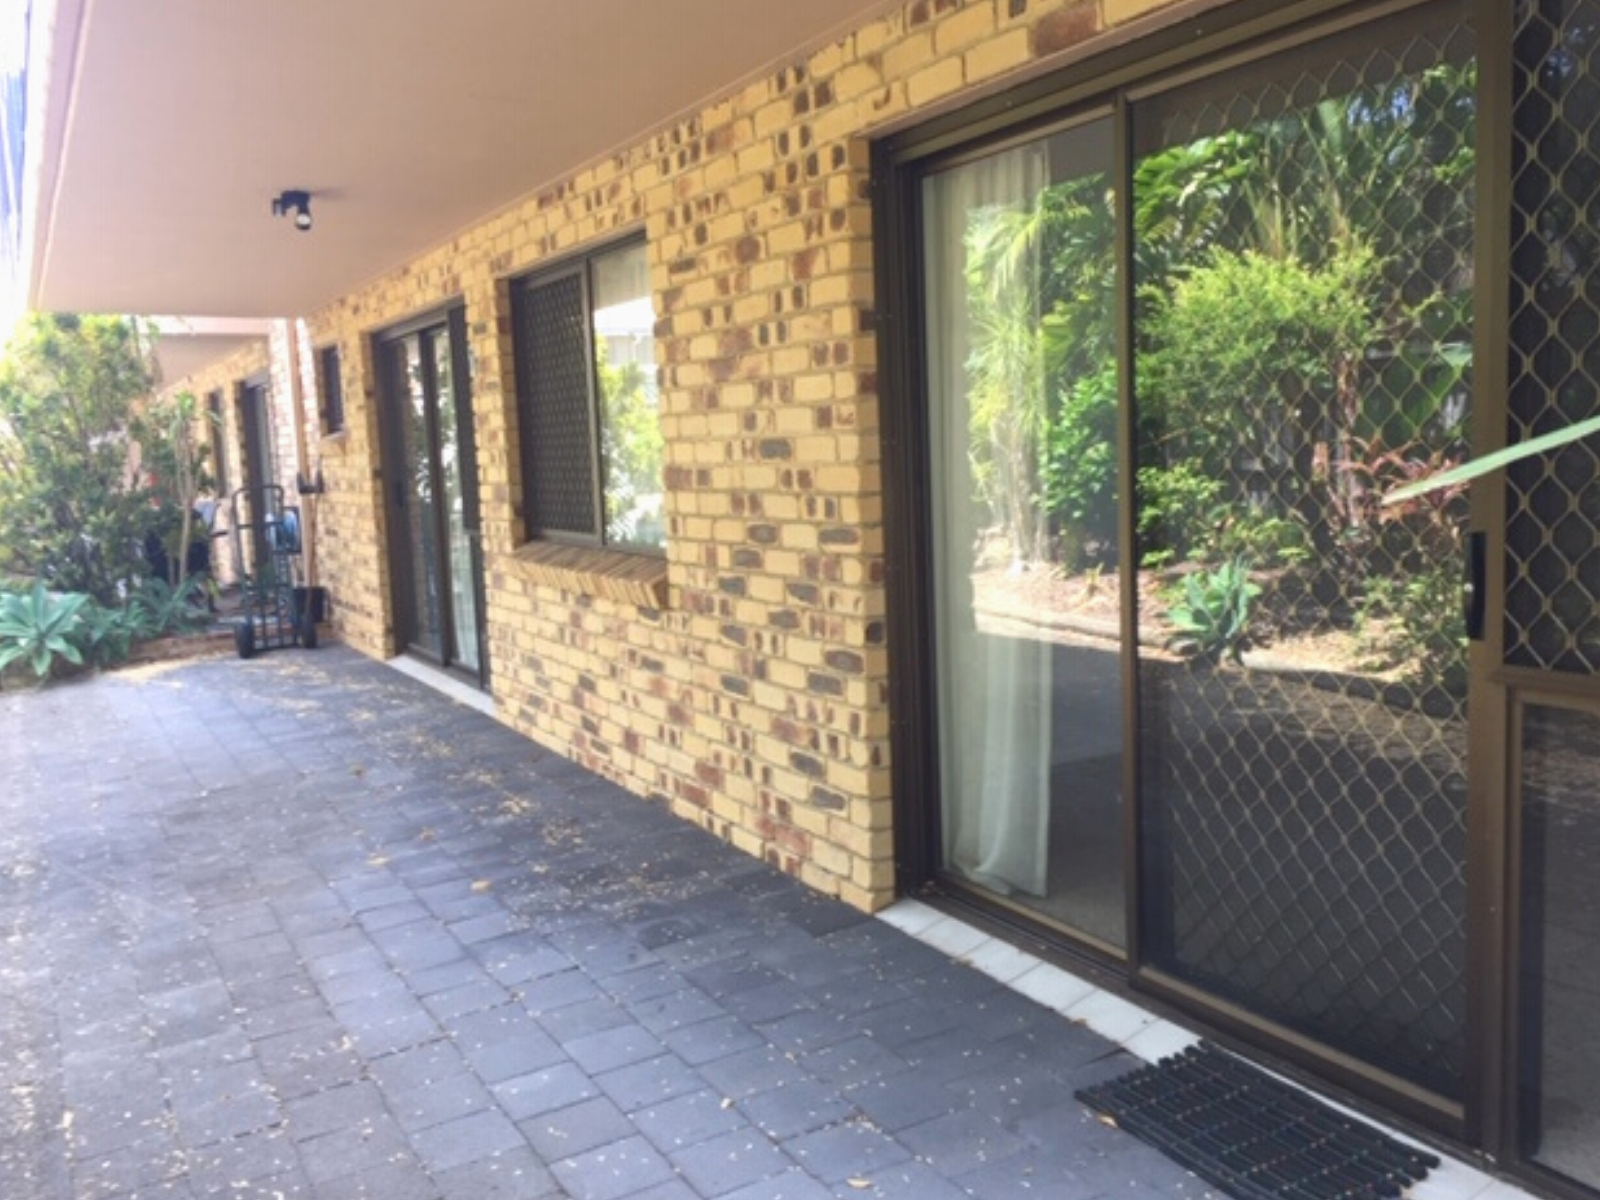 Ballina-Kokoda-Village-Unit-7-Front | RSL LifeCare - provide care and service to war veterans, retirement villages and accommodation, aged care services and assisted living